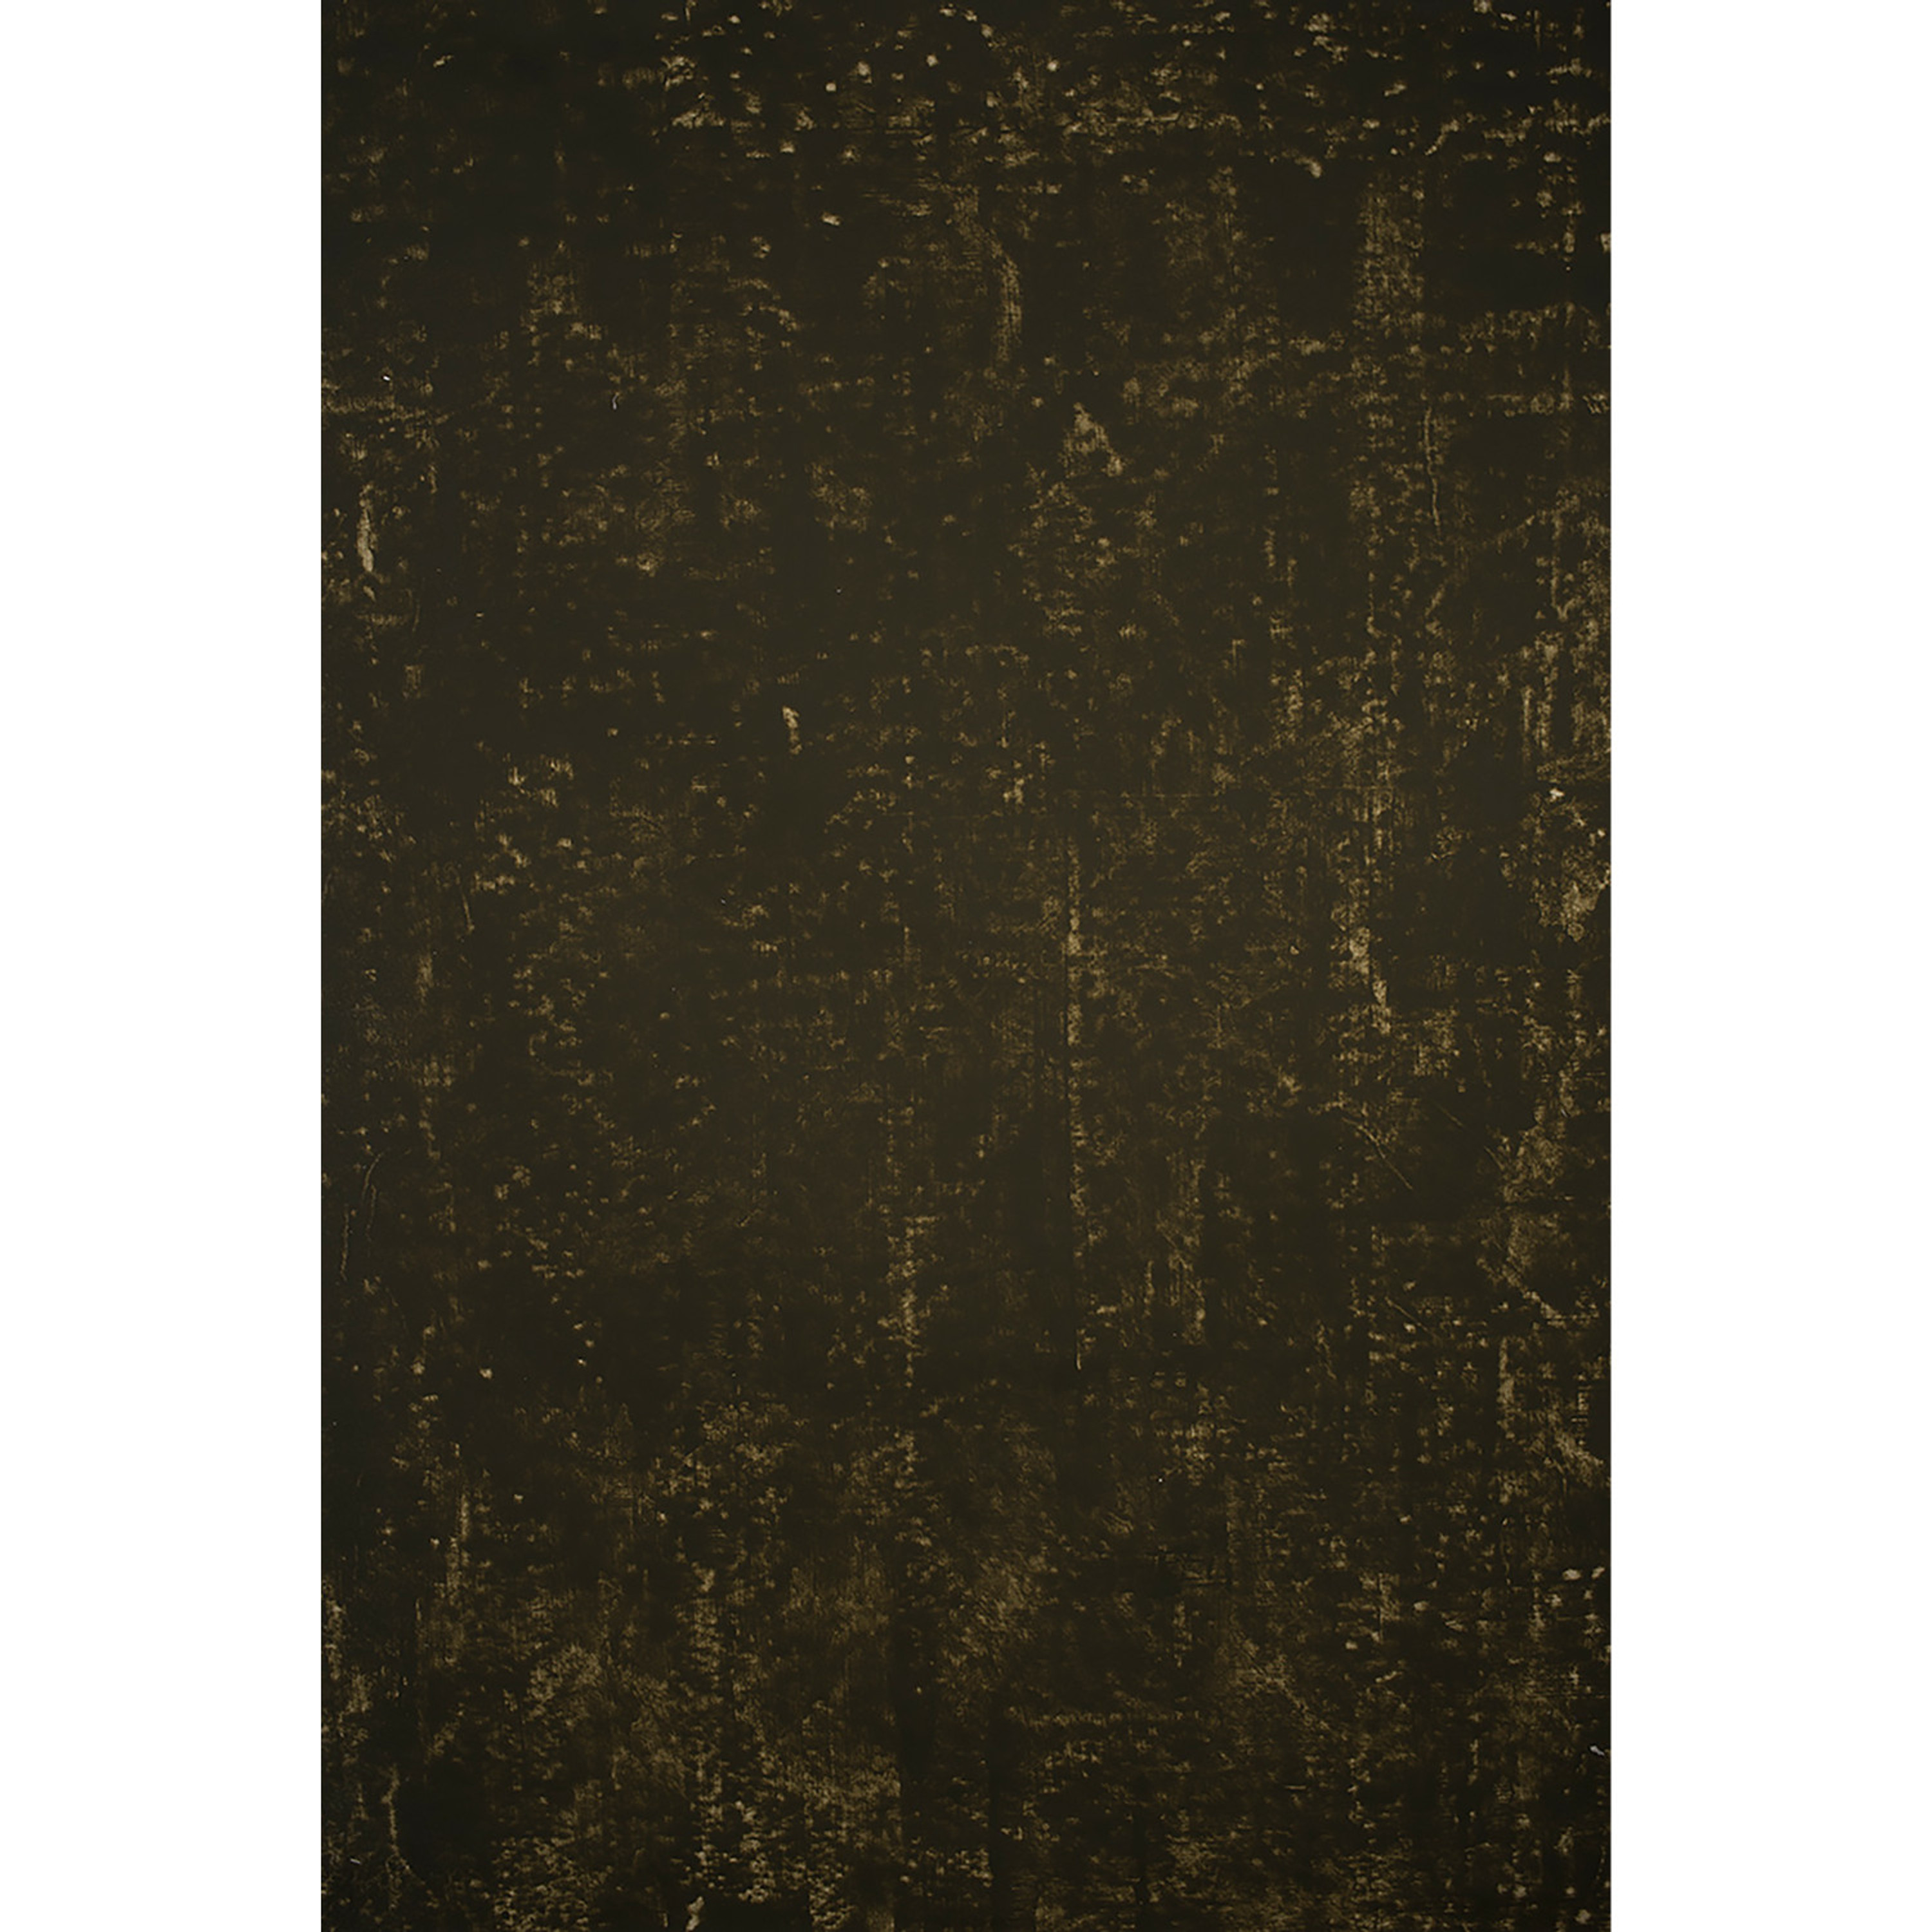 Gravity Backdrops Olive Green Distressed LG (SN: 10660)